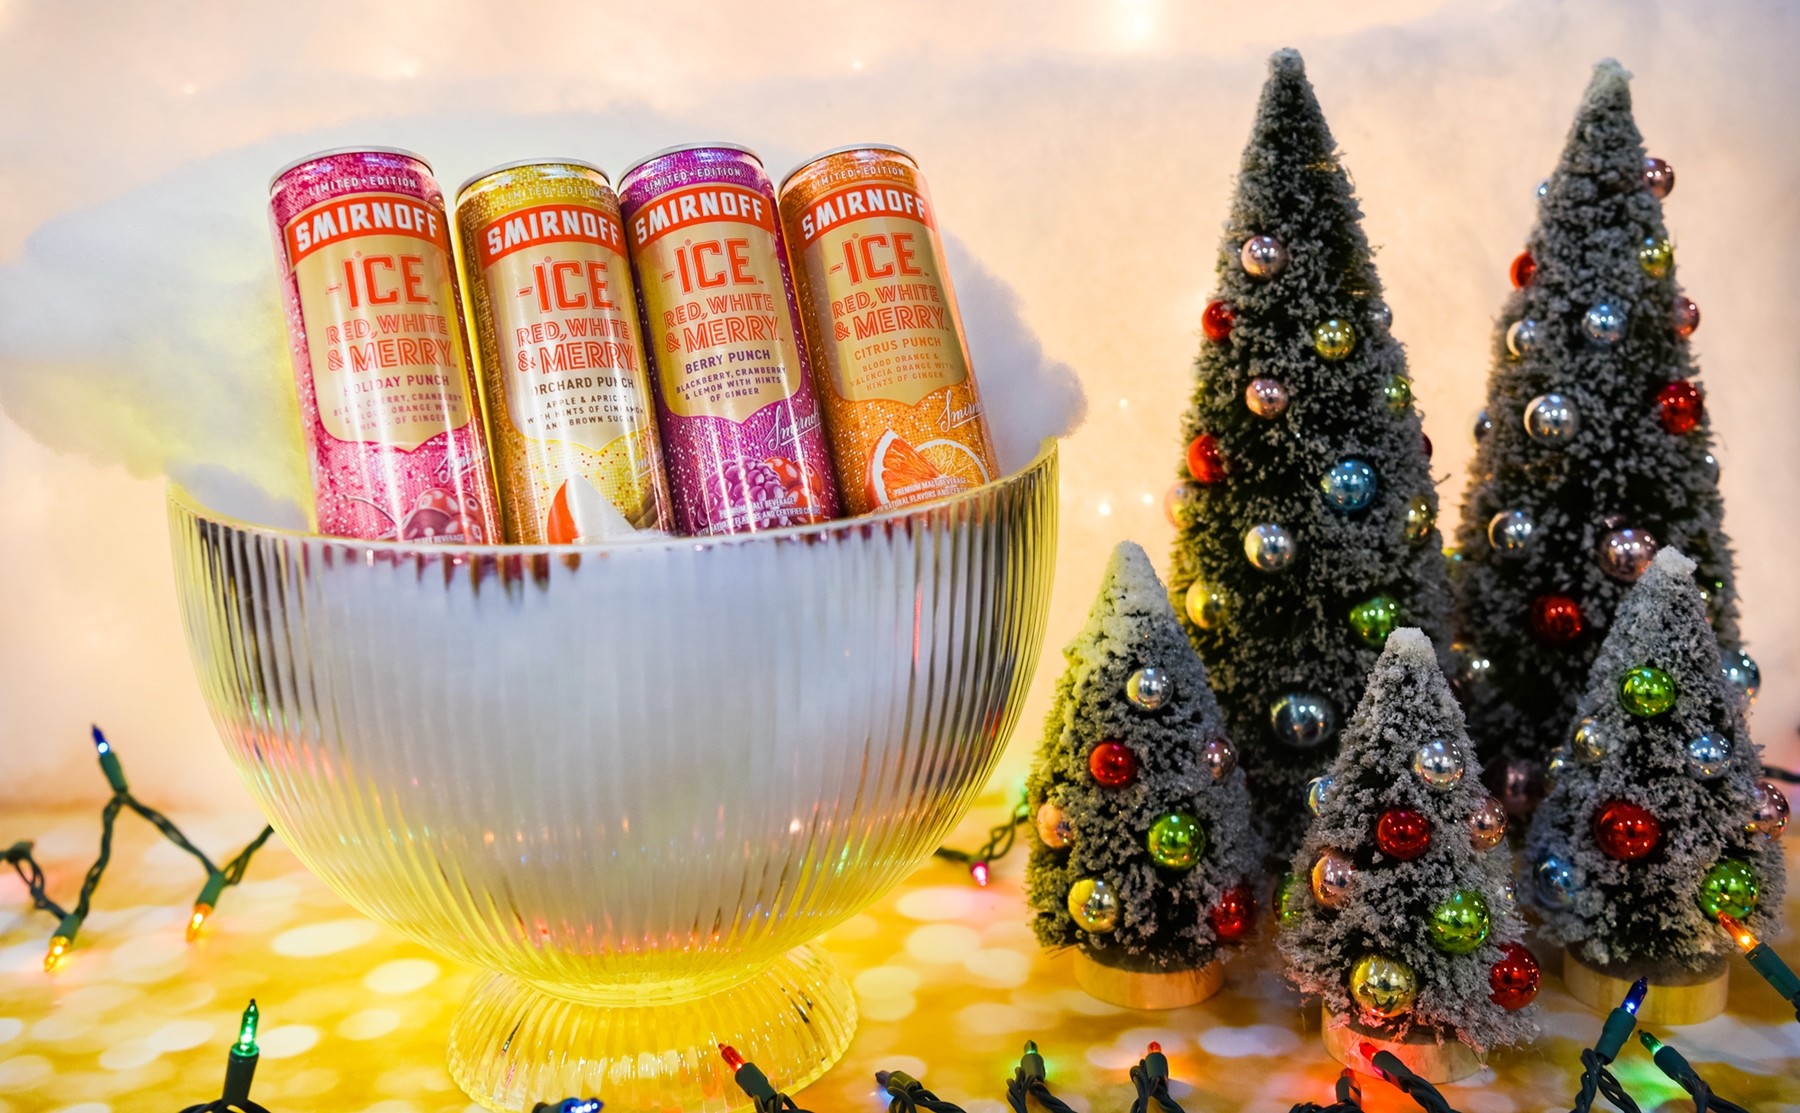 Tis the Season for Smirnoff ICE Red, White & Merry Holiday Punch